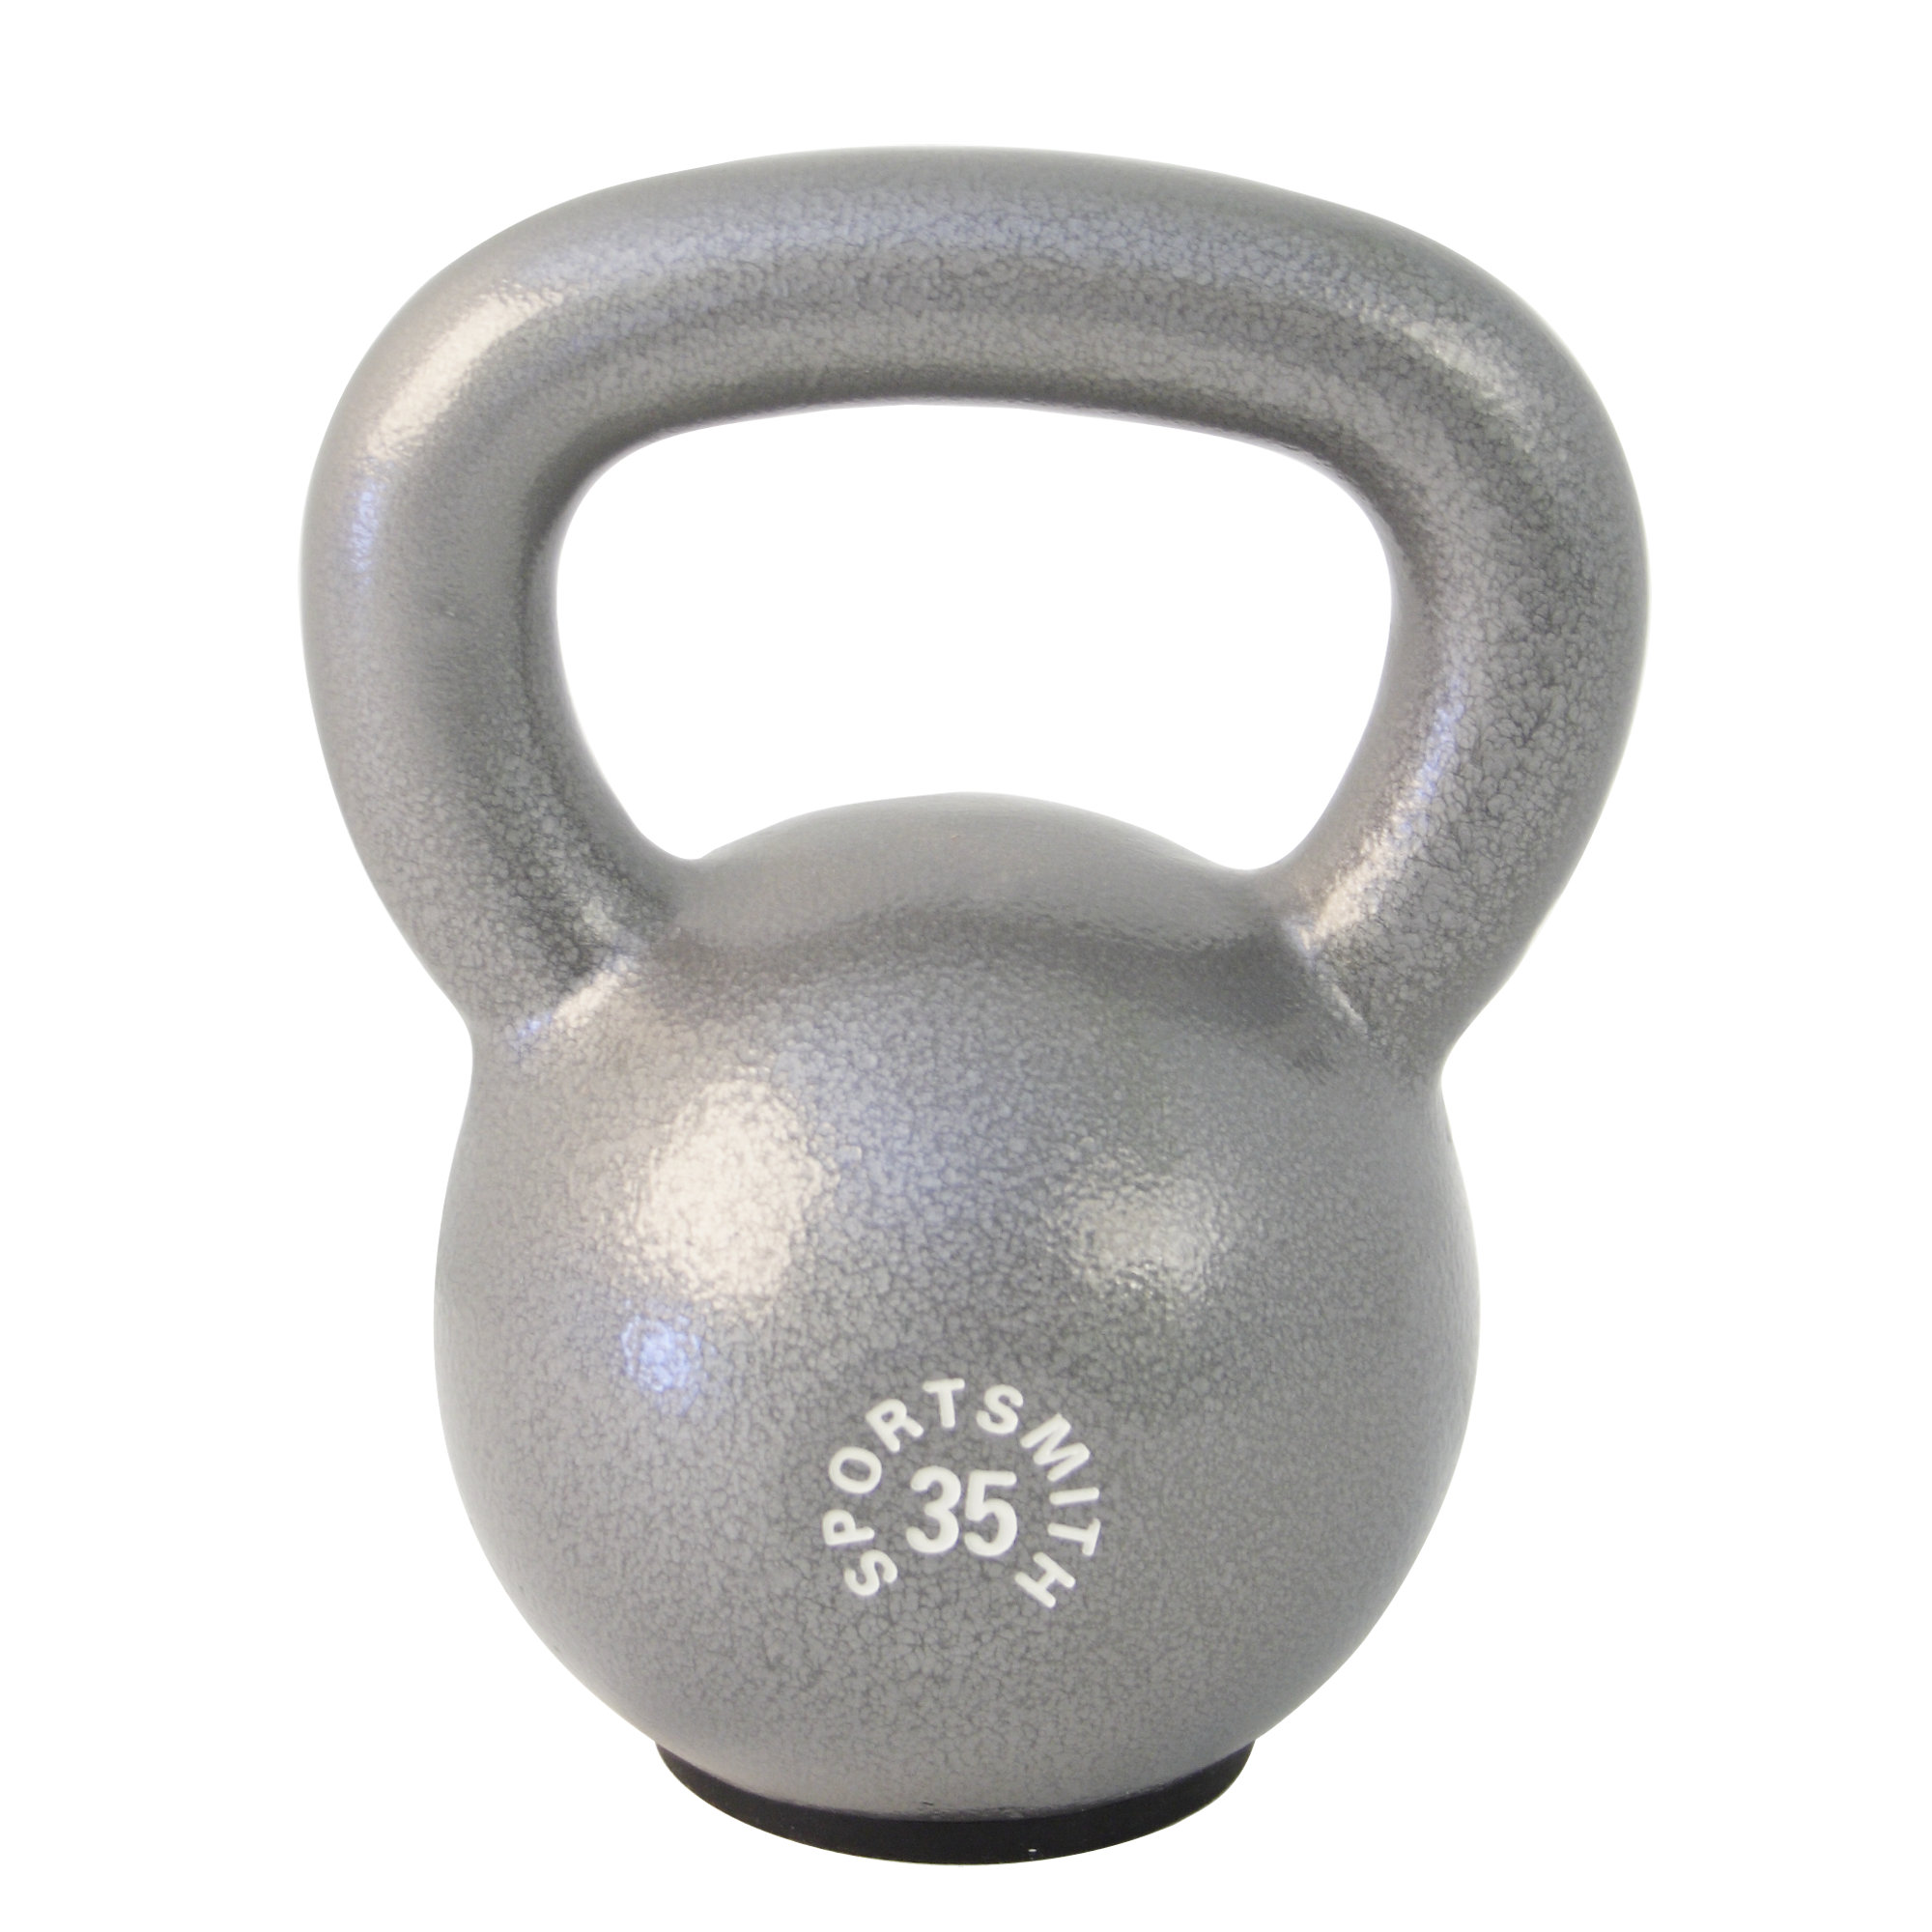 35 Lb. Kettlebell with Rubber Base, Cast Iron, Gray